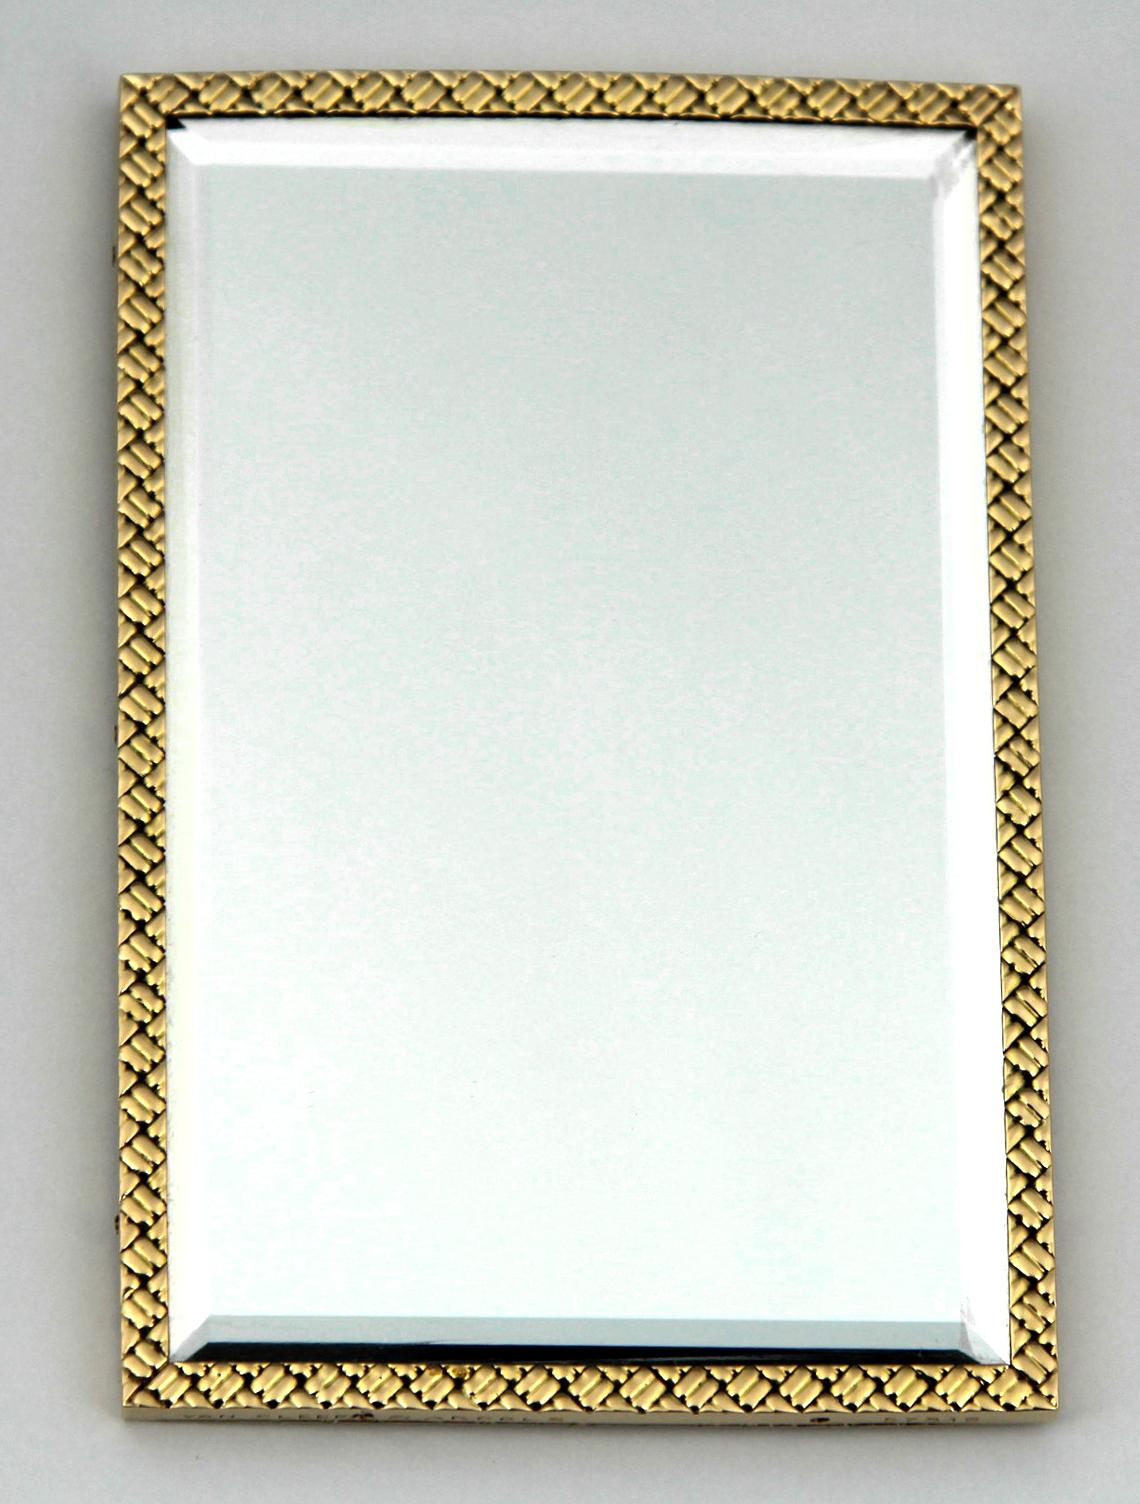 A Van Cleef & Arpels double-sided bevelled edge mirror, the 18ct yellow gold perimeter decorated with a crisscross block pattern design, the edge signed Van Cleef & Arpels, no. 57319, with suede slip pouch, 9cm x 6cm